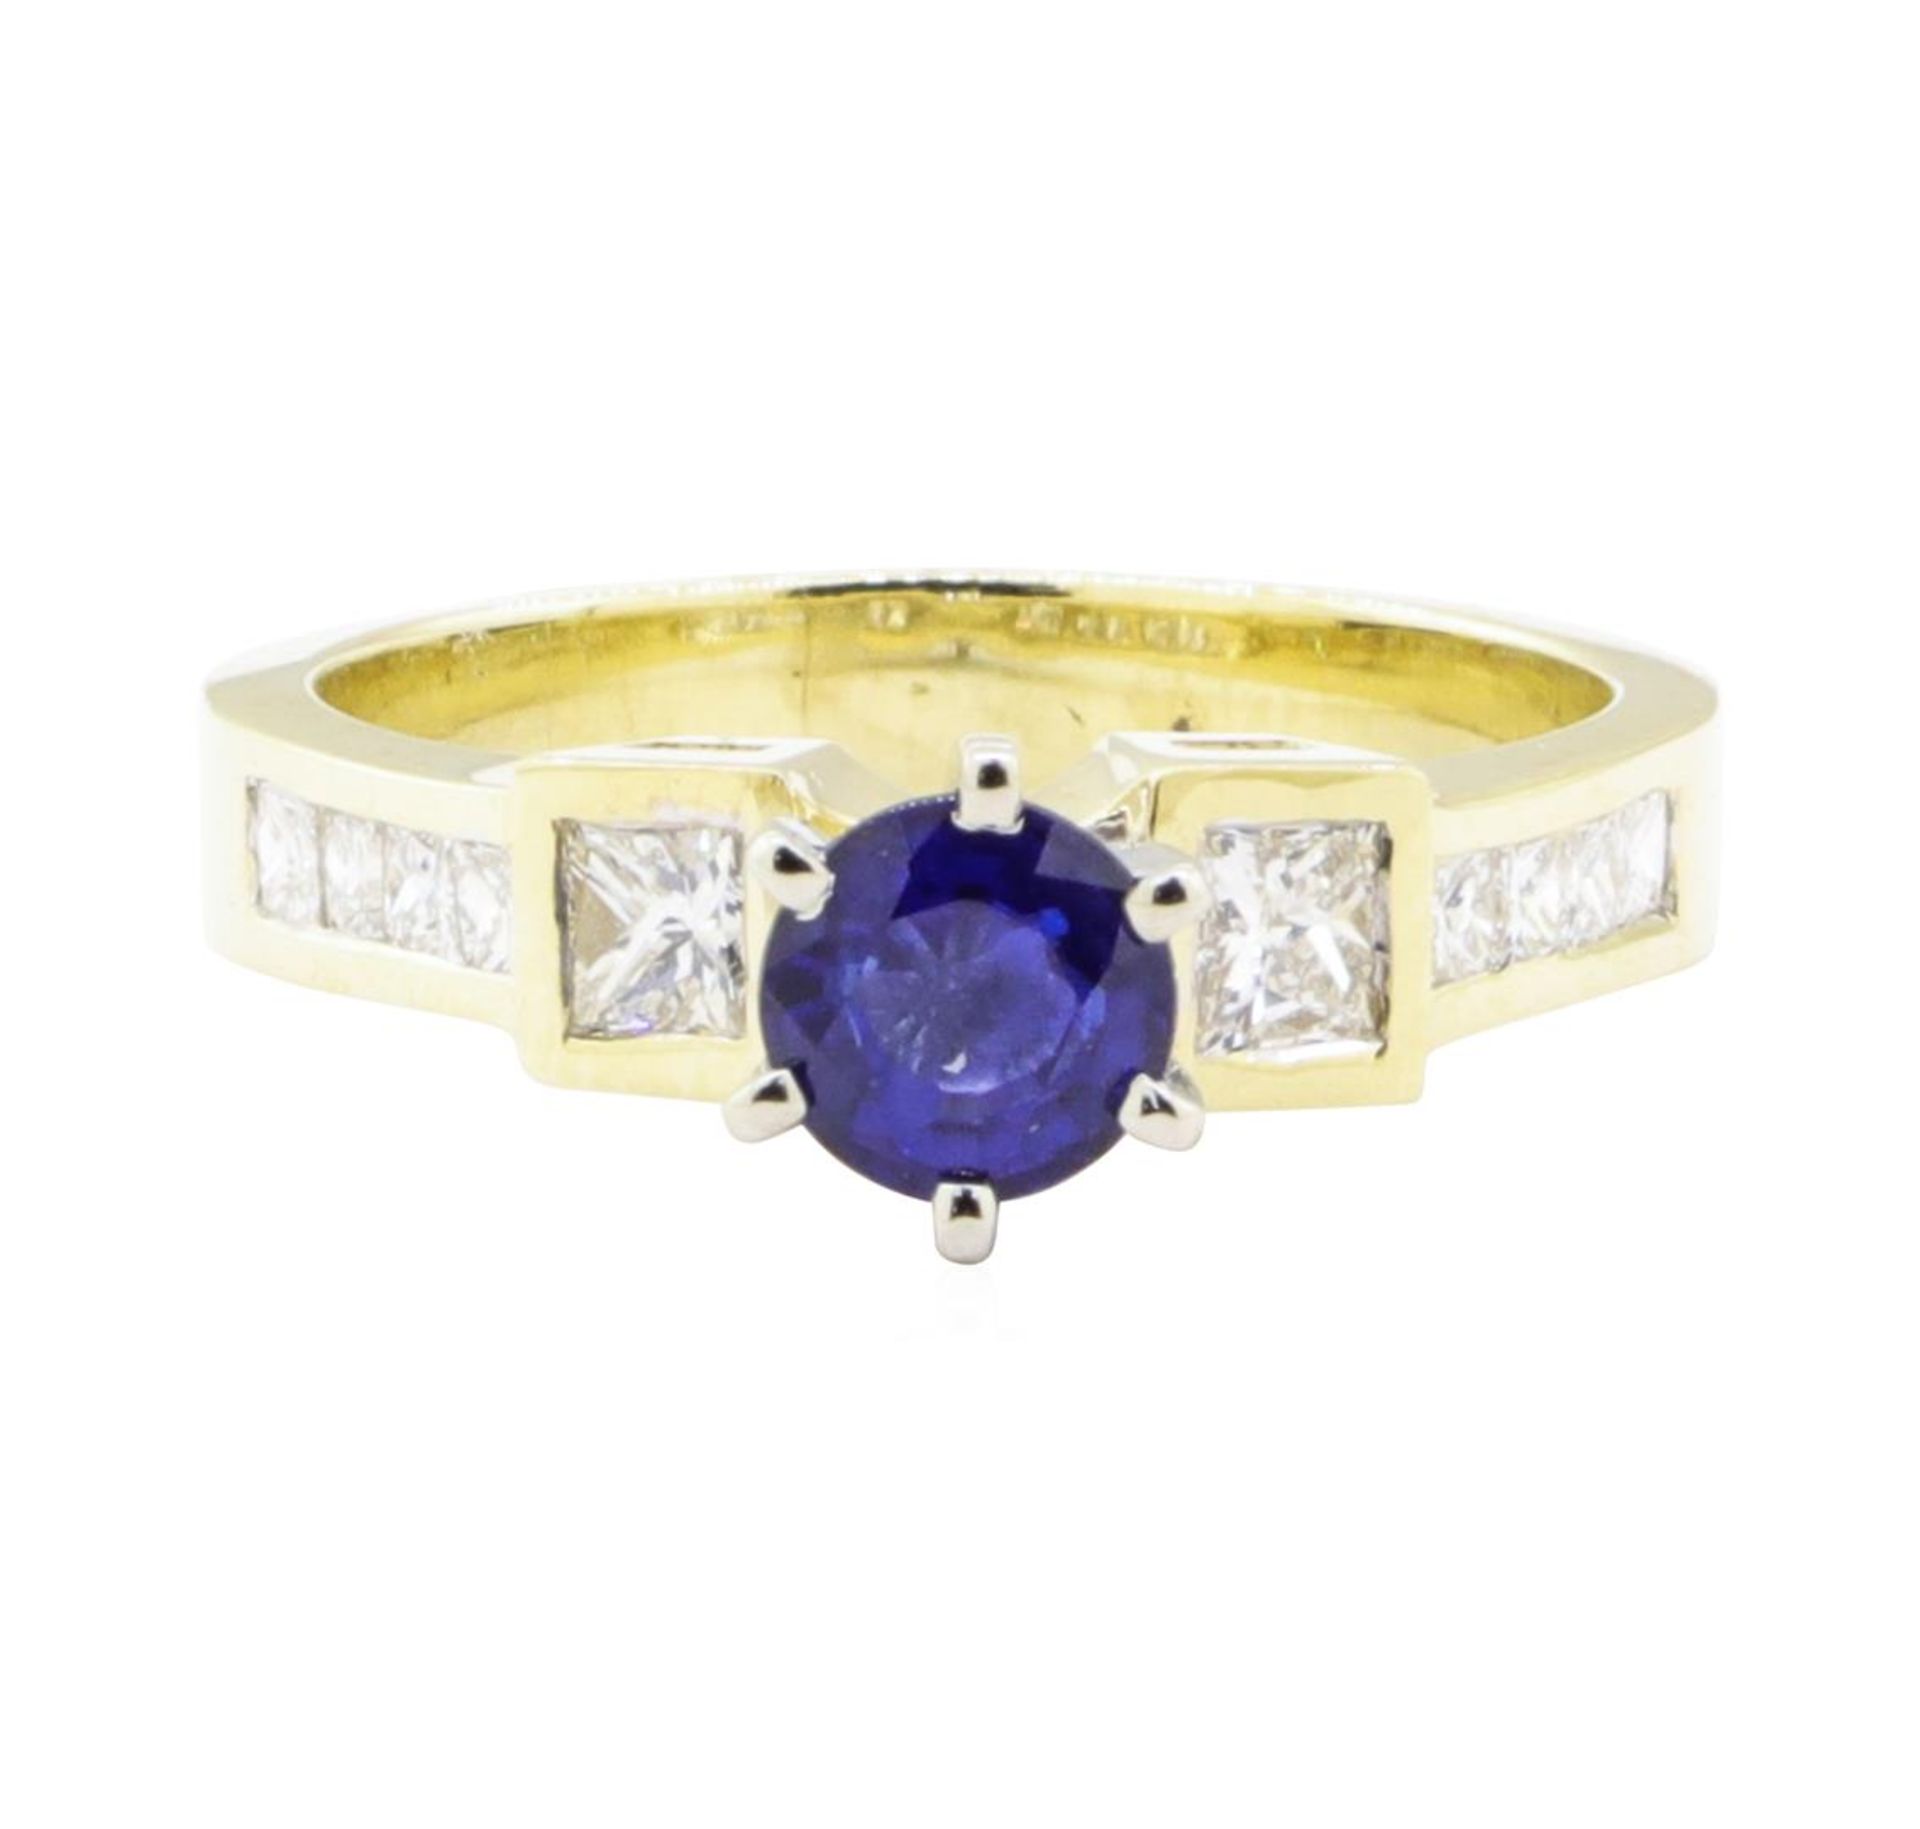 1.24 ctw Sapphire And Diamond Ring - 14KT Yellow Gold - Image 2 of 5